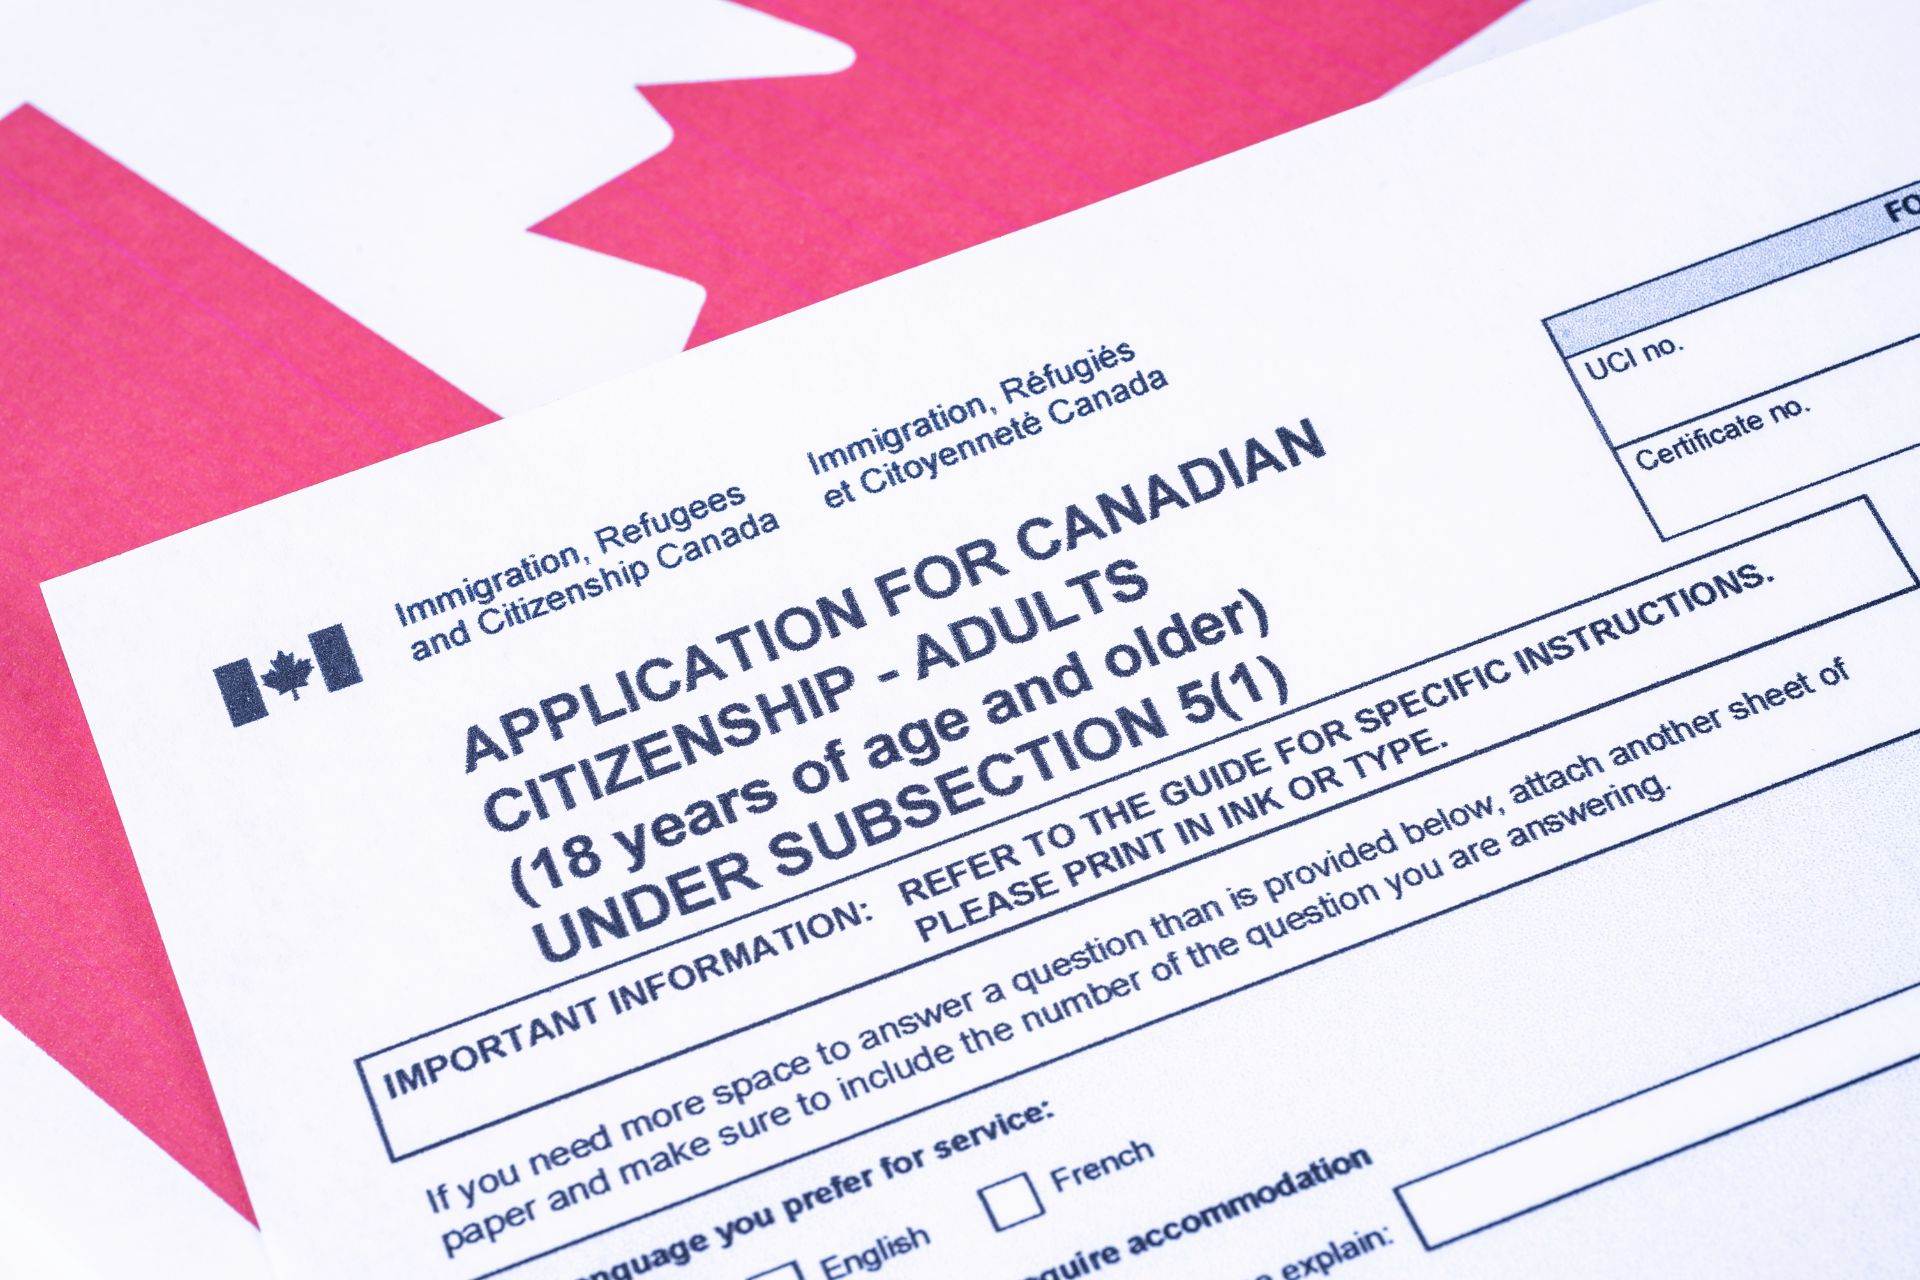 Canadian citizenship application: Process and list the documents required for application